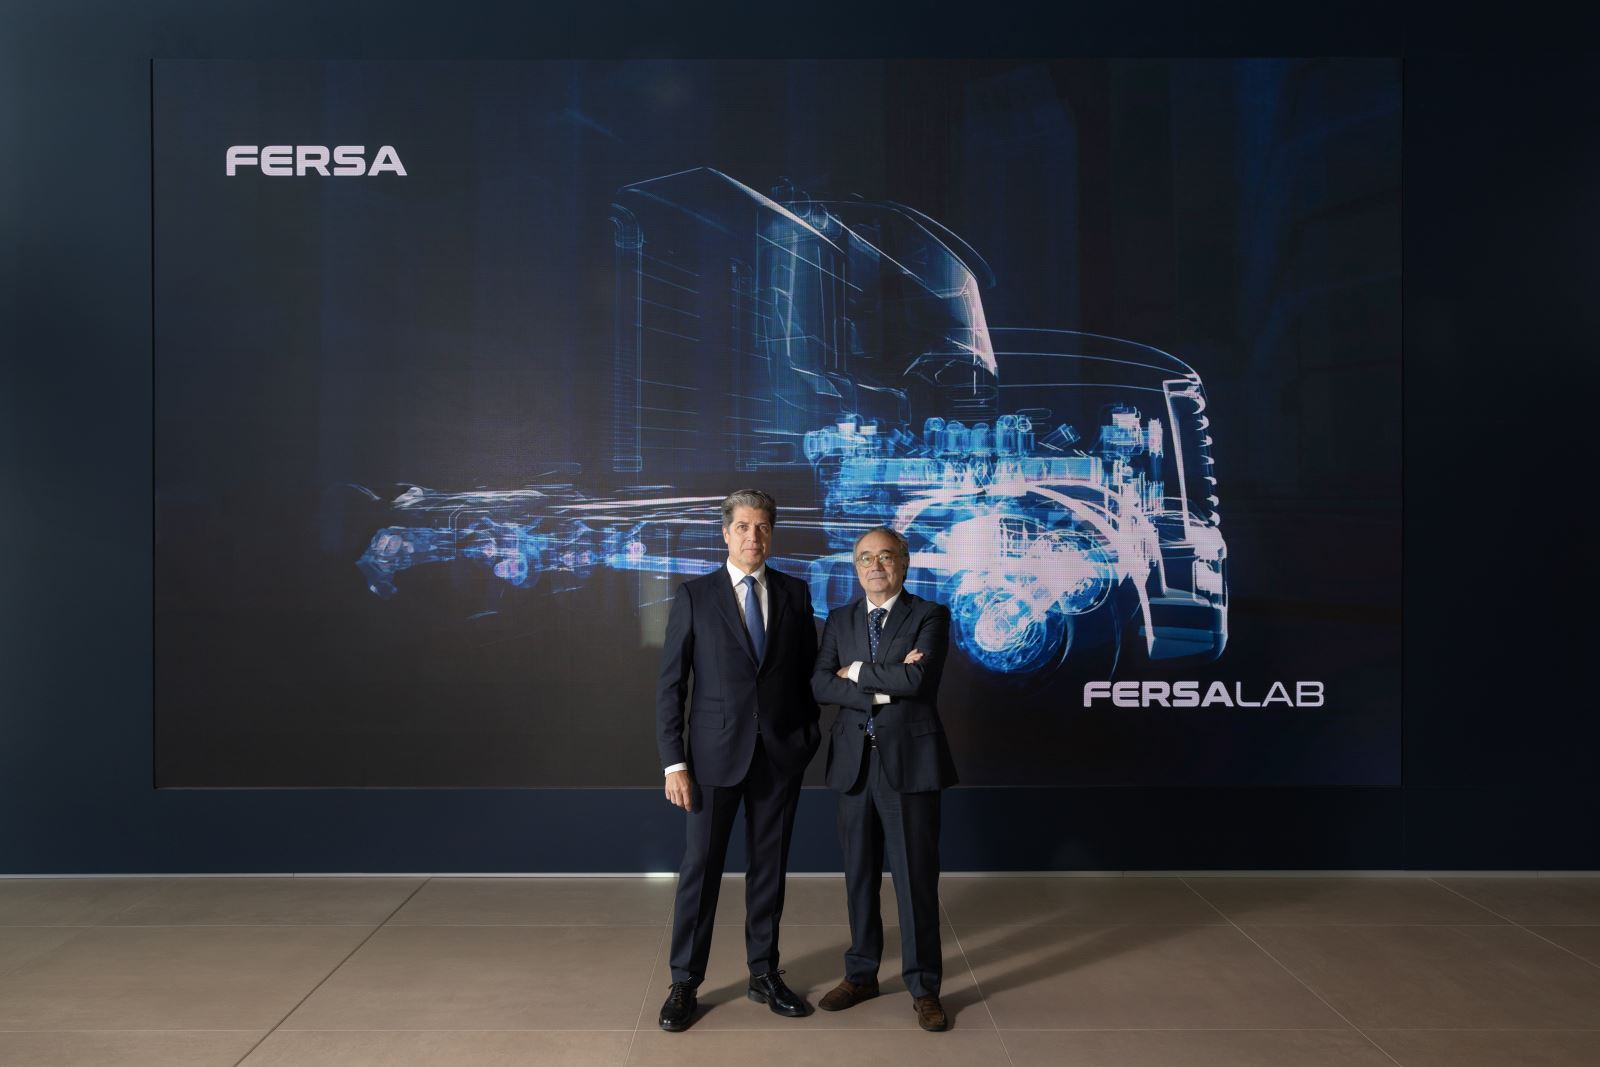 The Spanish multinational FERSA has appointed Rafael Paniagua as the new CEO of the company, with the purpose of "maintaining and enhancing the exponential growth that Fersa has been experiencing in recent years".